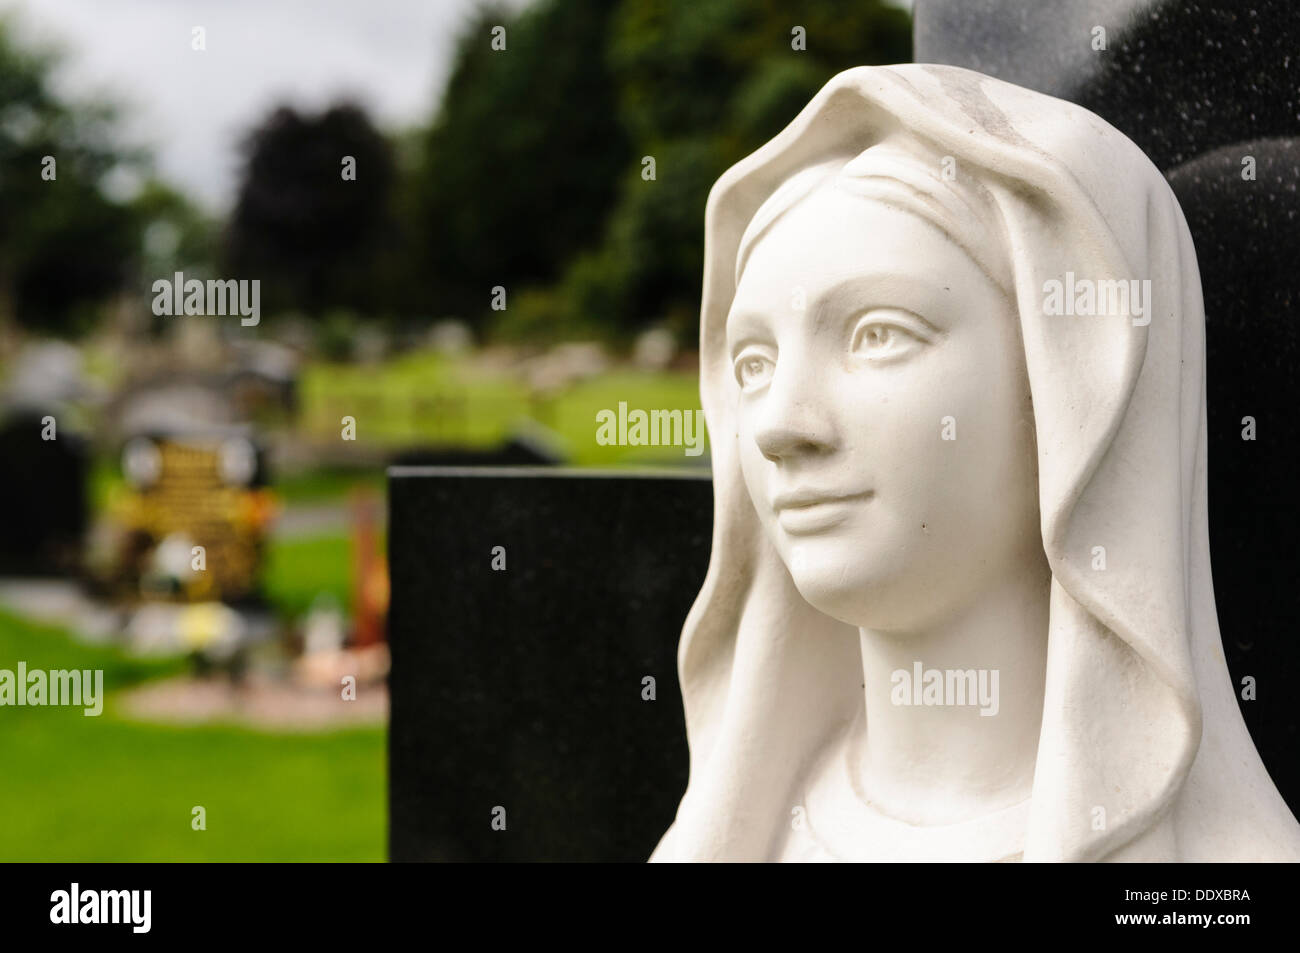 Statue of the Virgin Mary in a graveyard Stock Photo